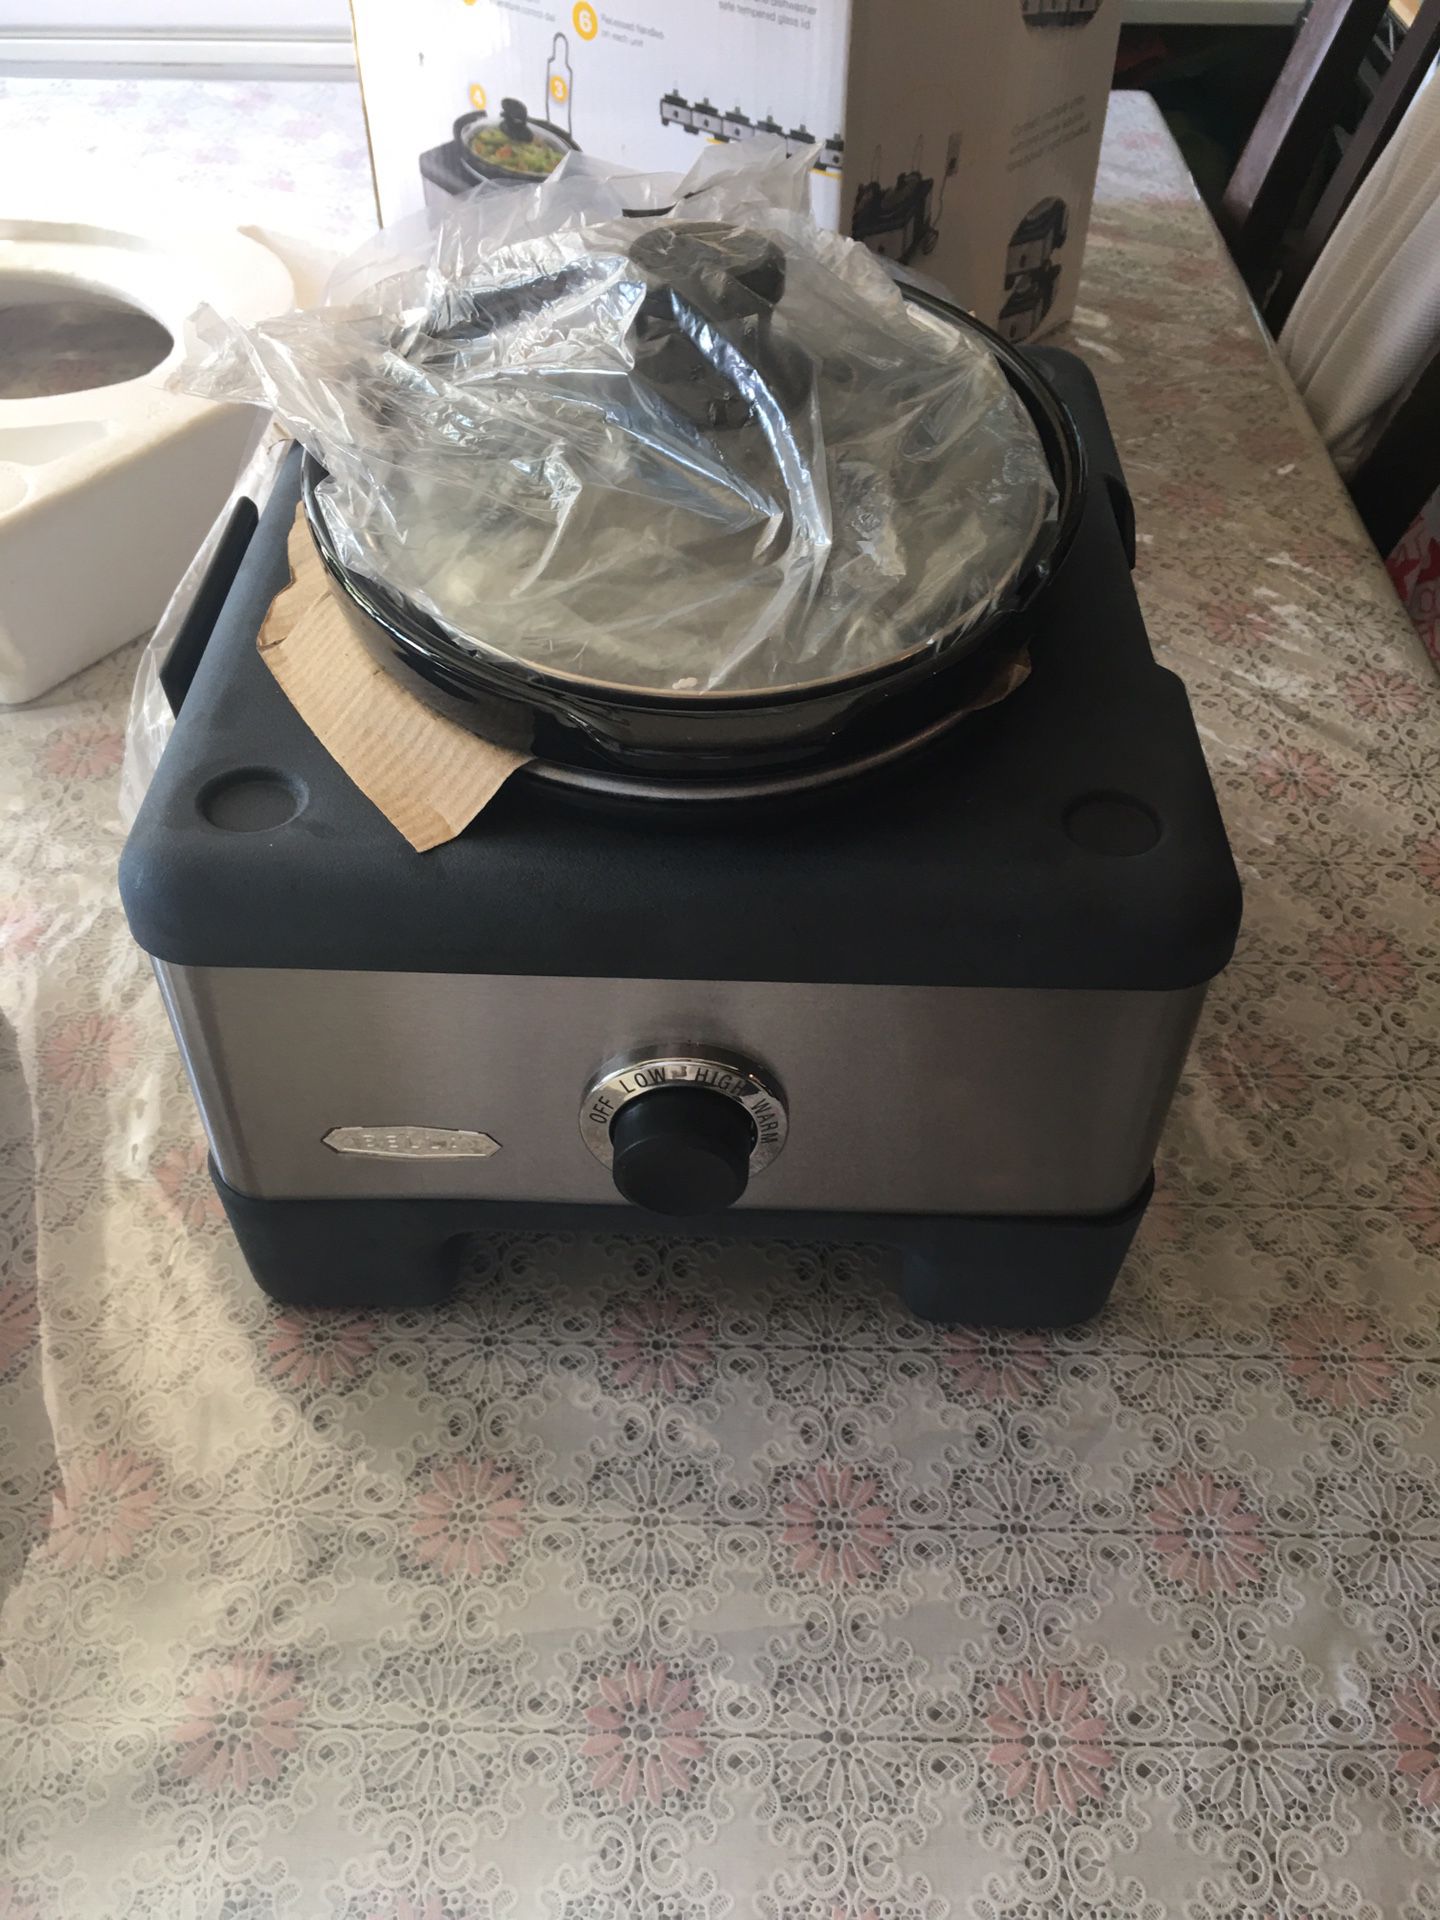 Bella - 5-qt. Slow Cooker with Dipper - Stainless Steel for Sale in Salem,  OR - OfferUp